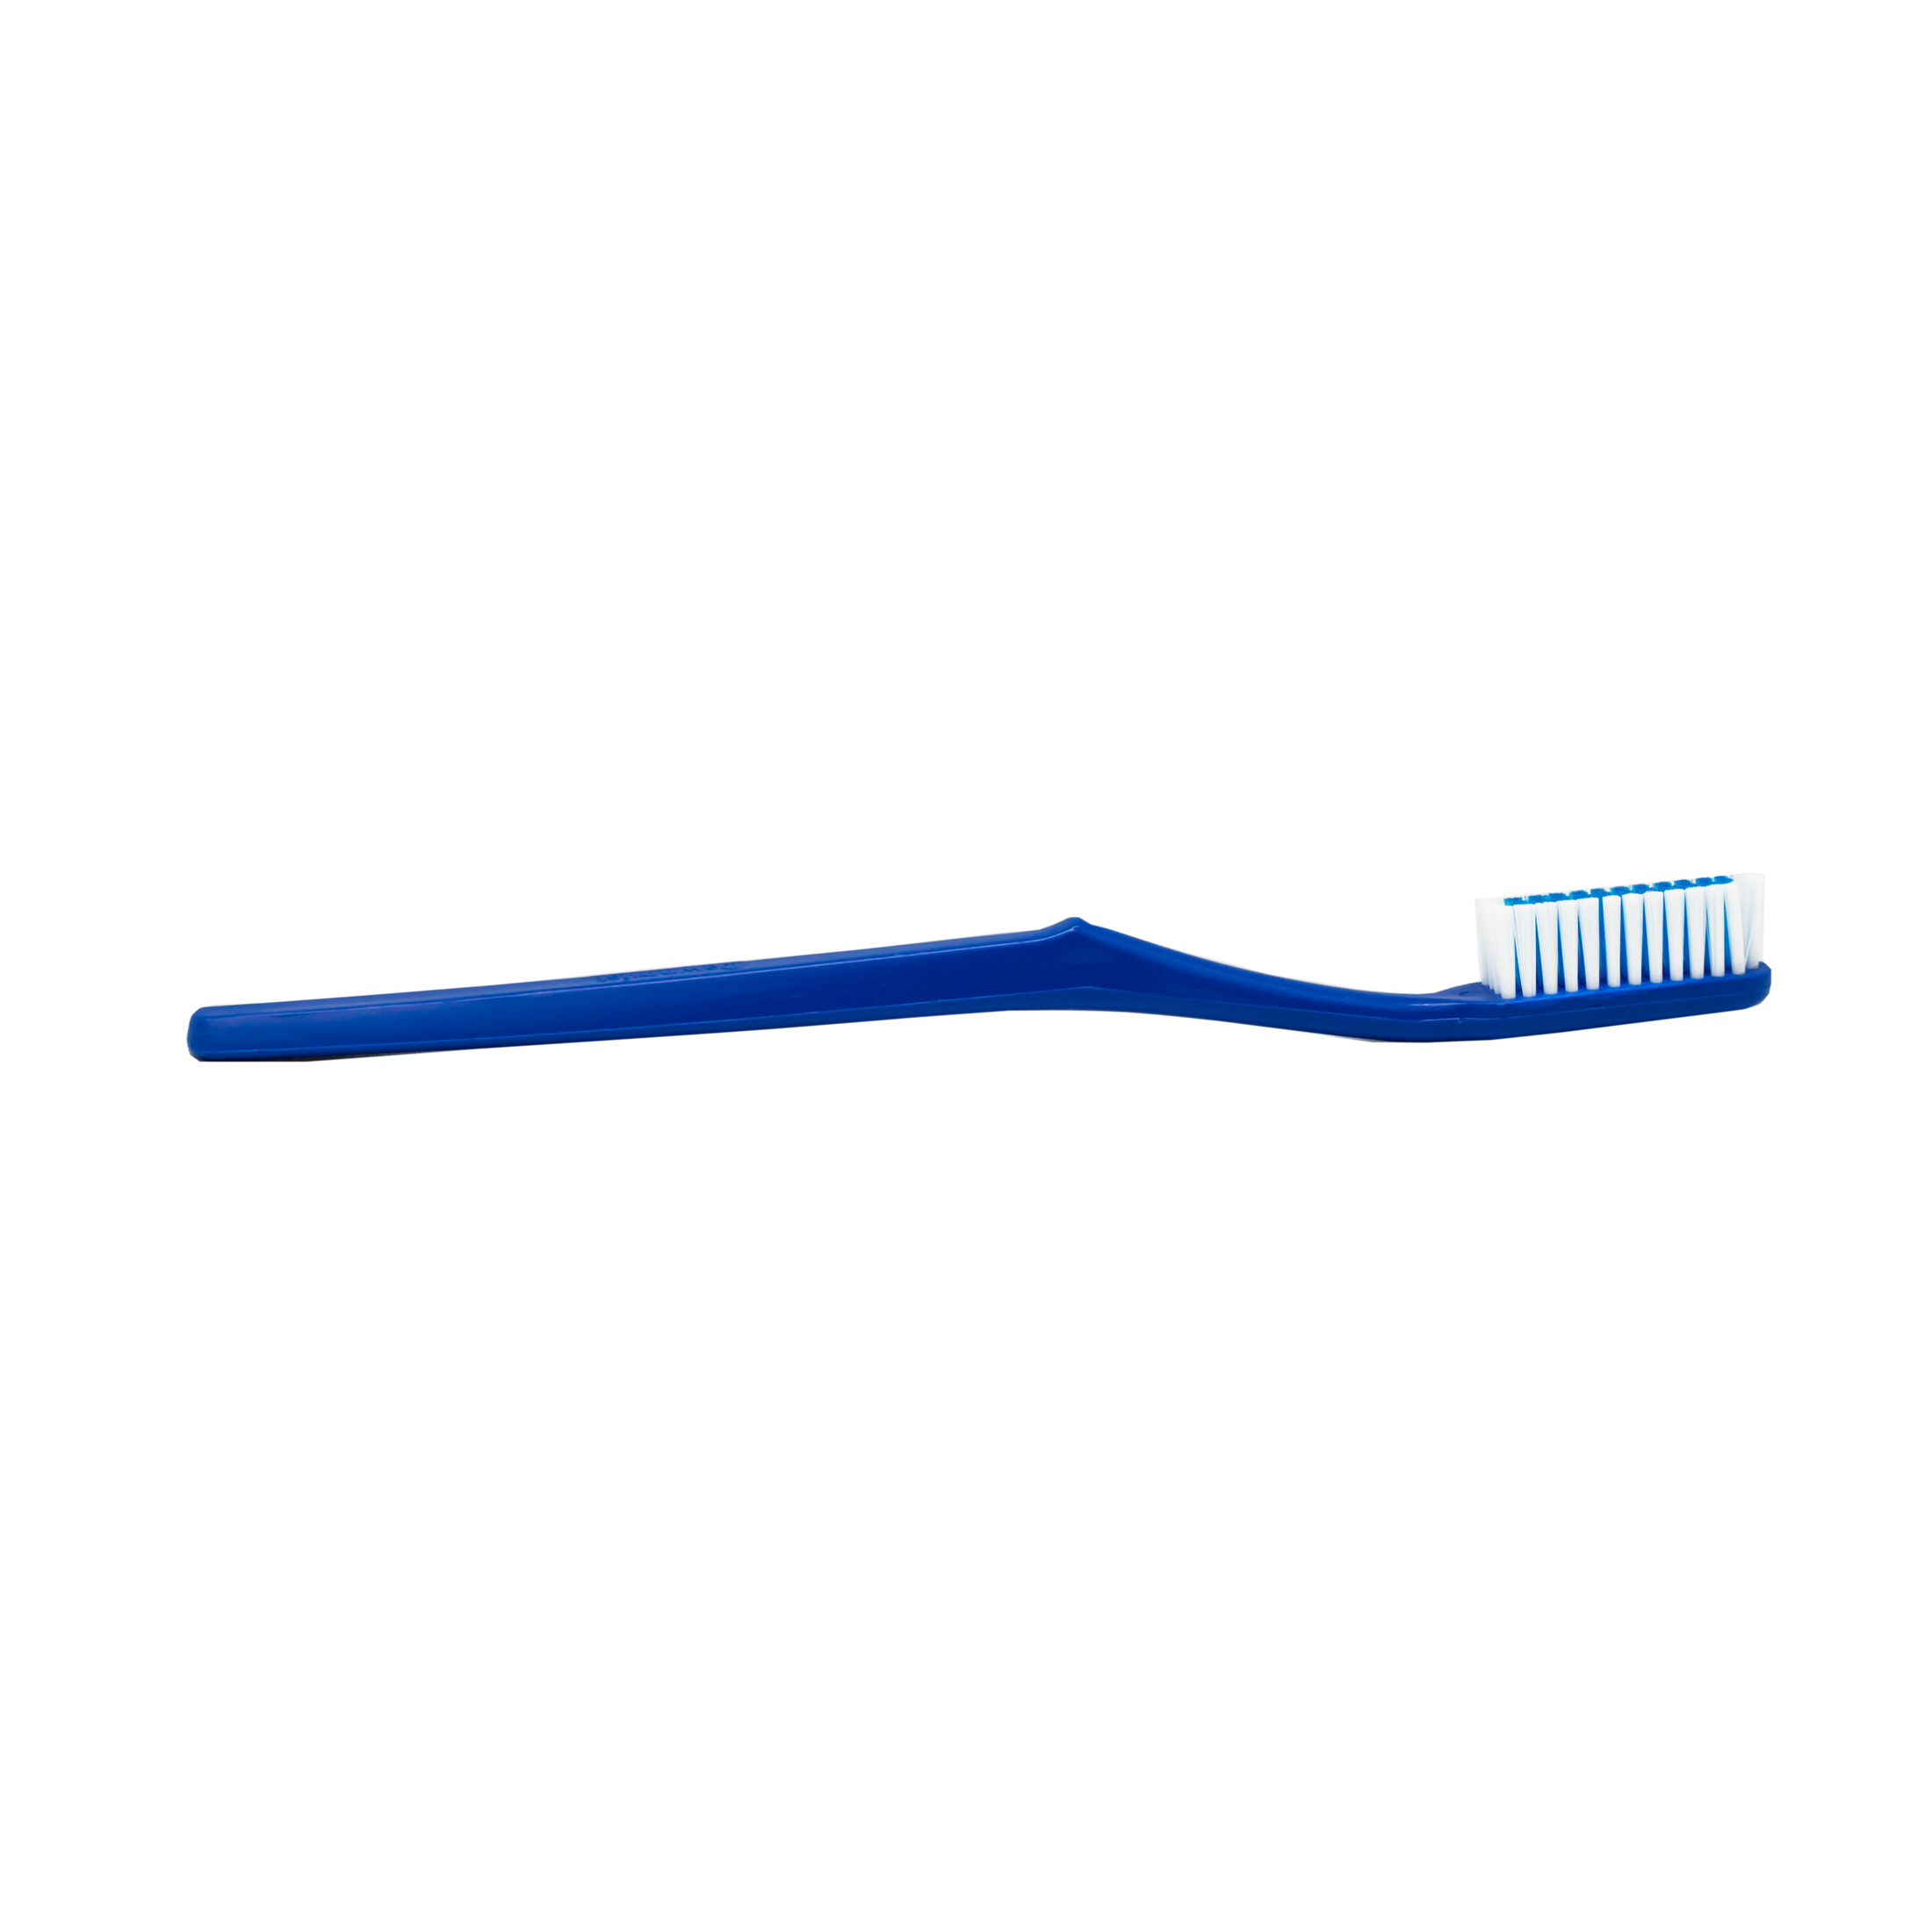 Toothbrushes Products, Supplies and Equipment